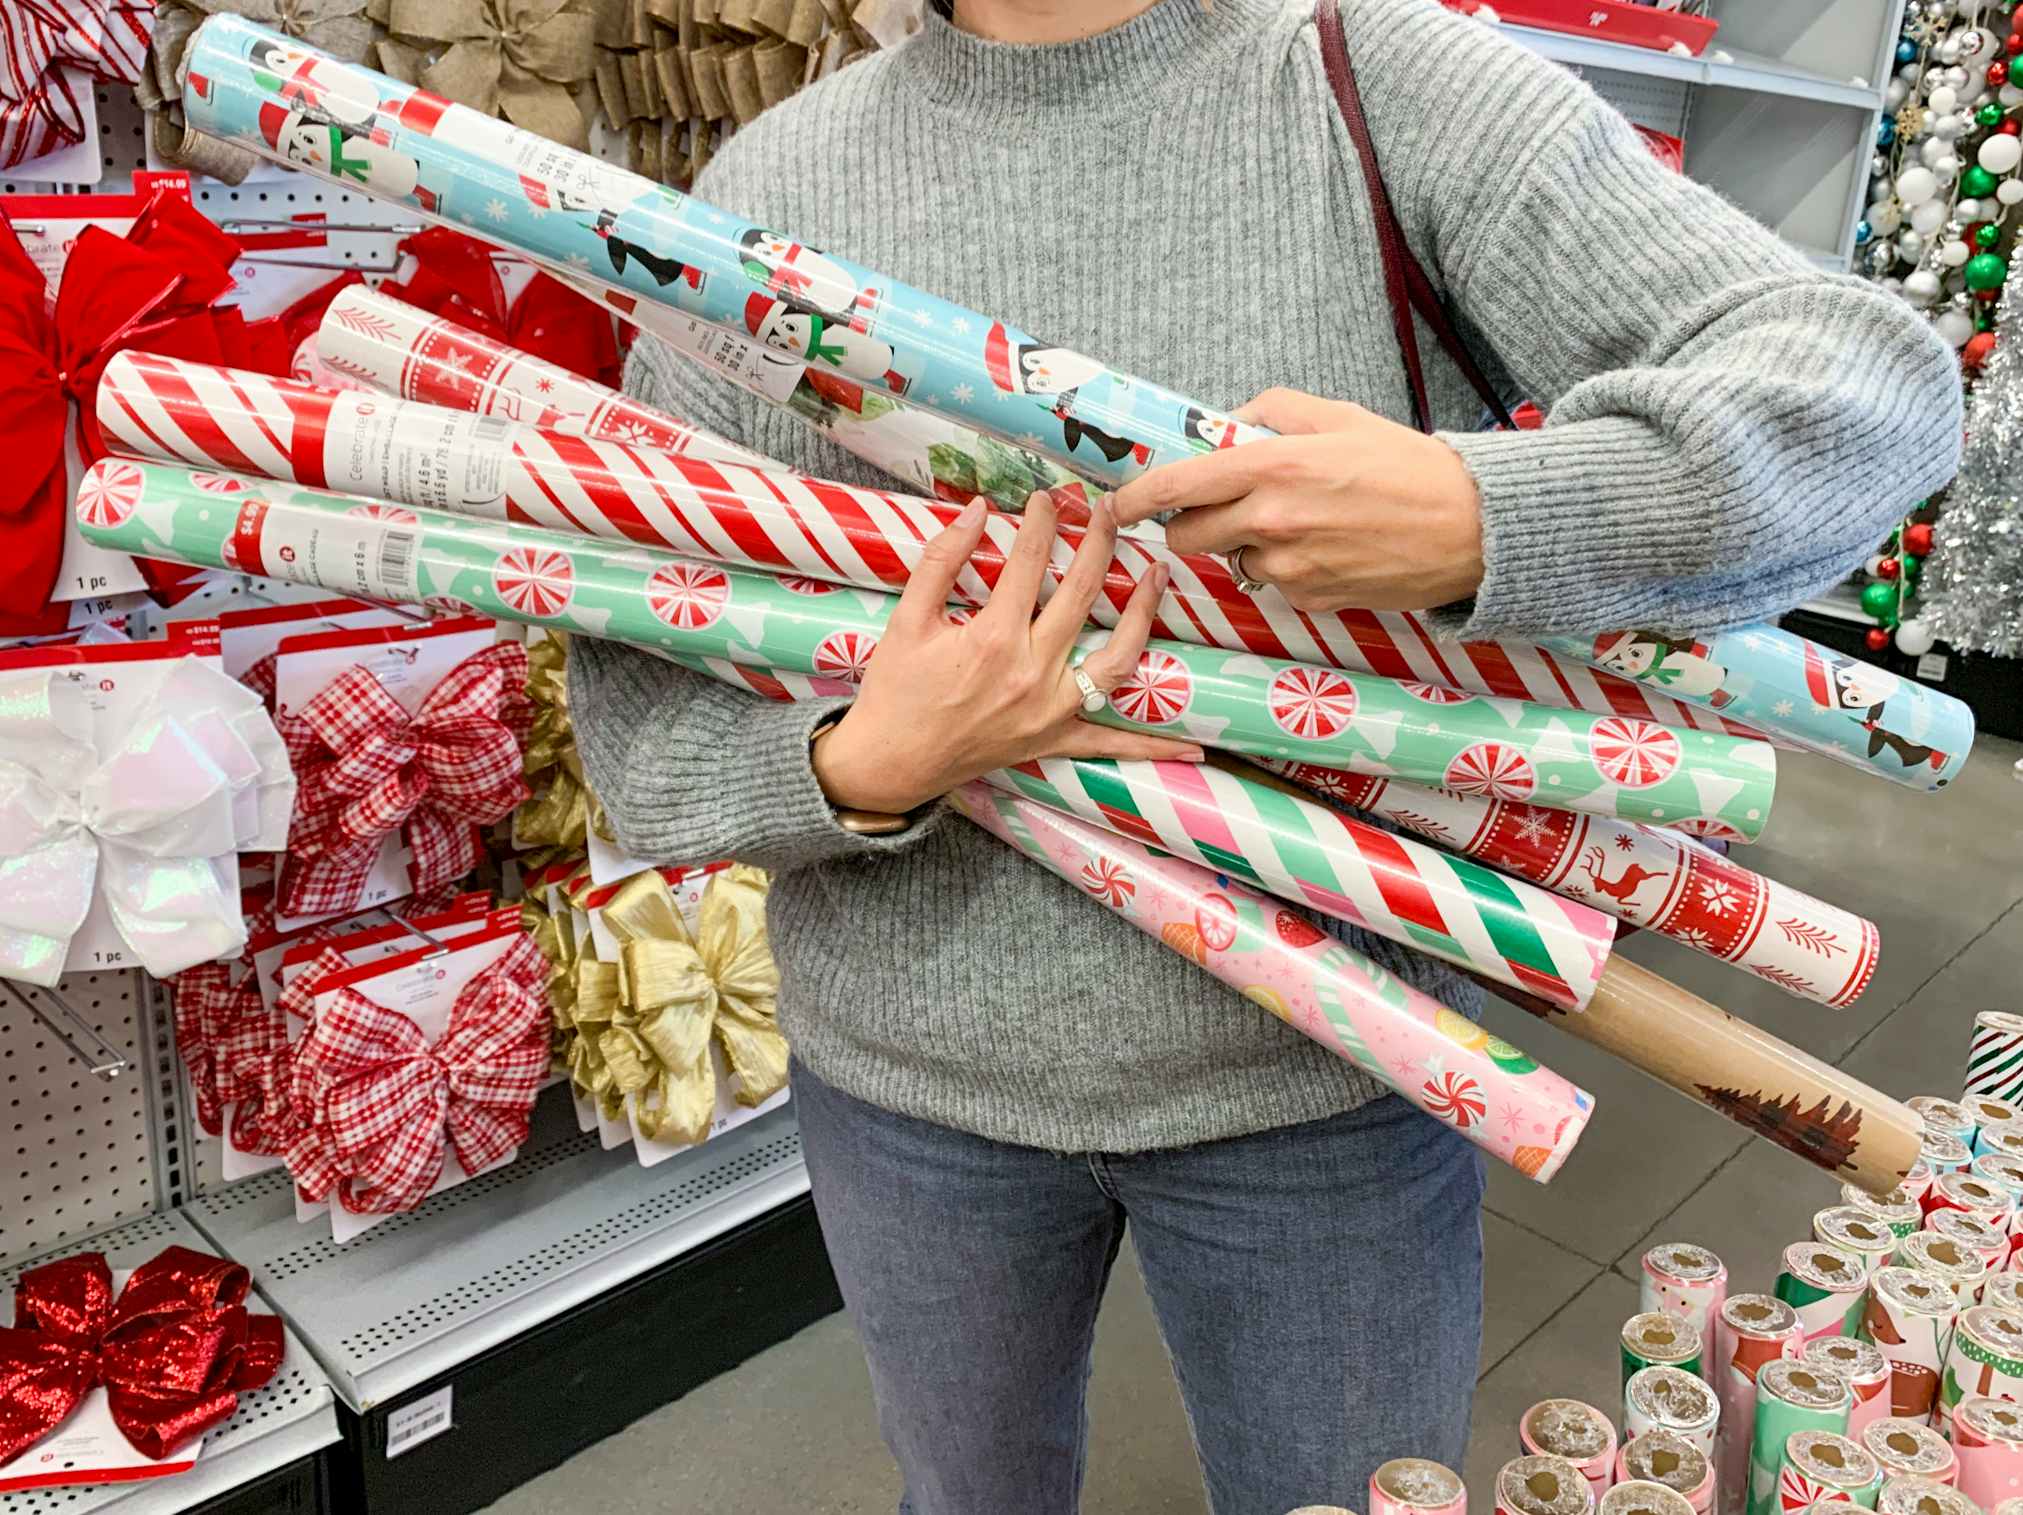 LPT: Use plain brown wrapping paper for presents, its far cheaper